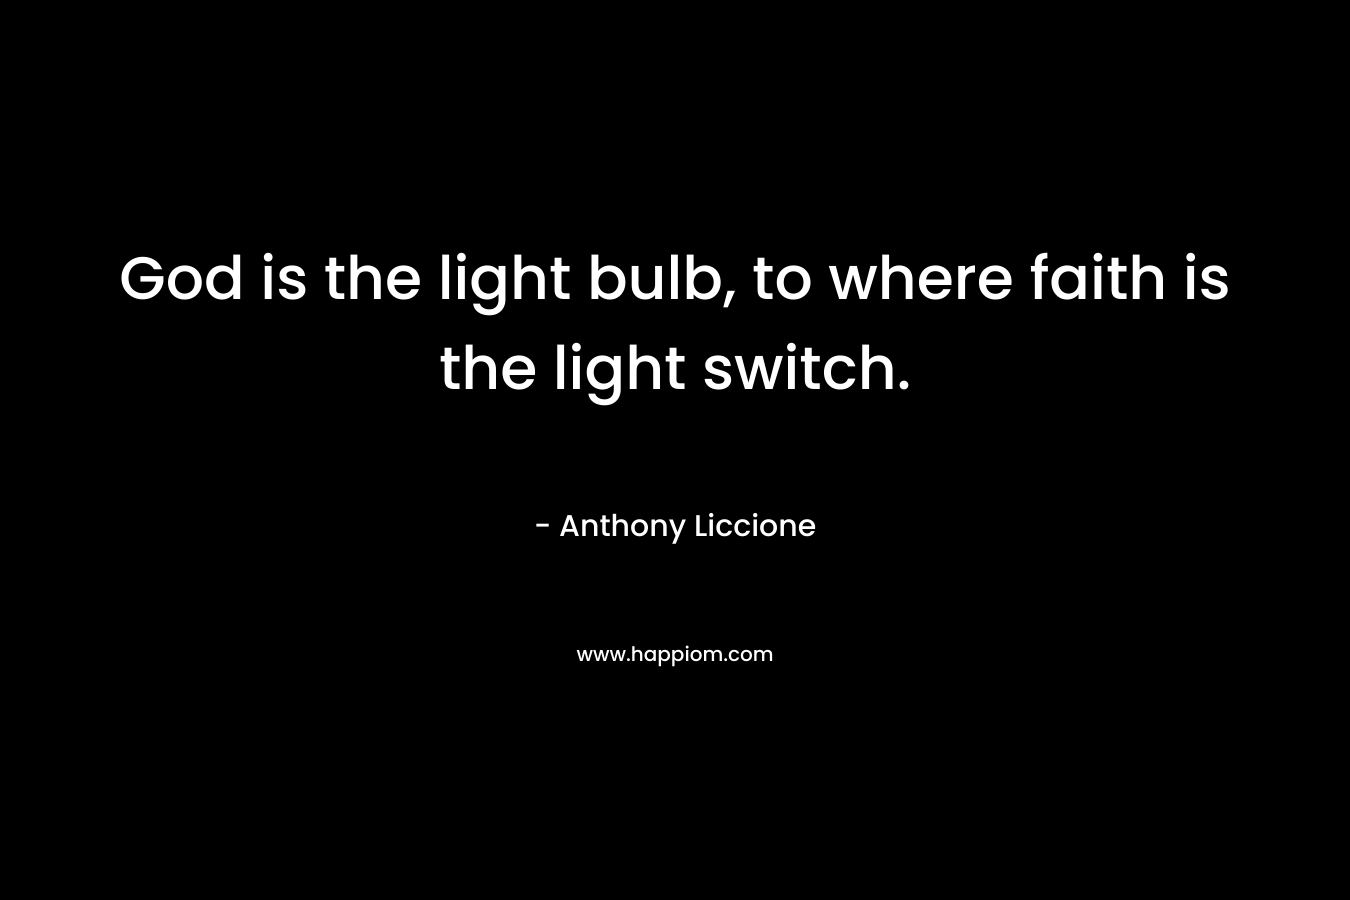 God is the light bulb, to where faith is the light switch. – Anthony Liccione